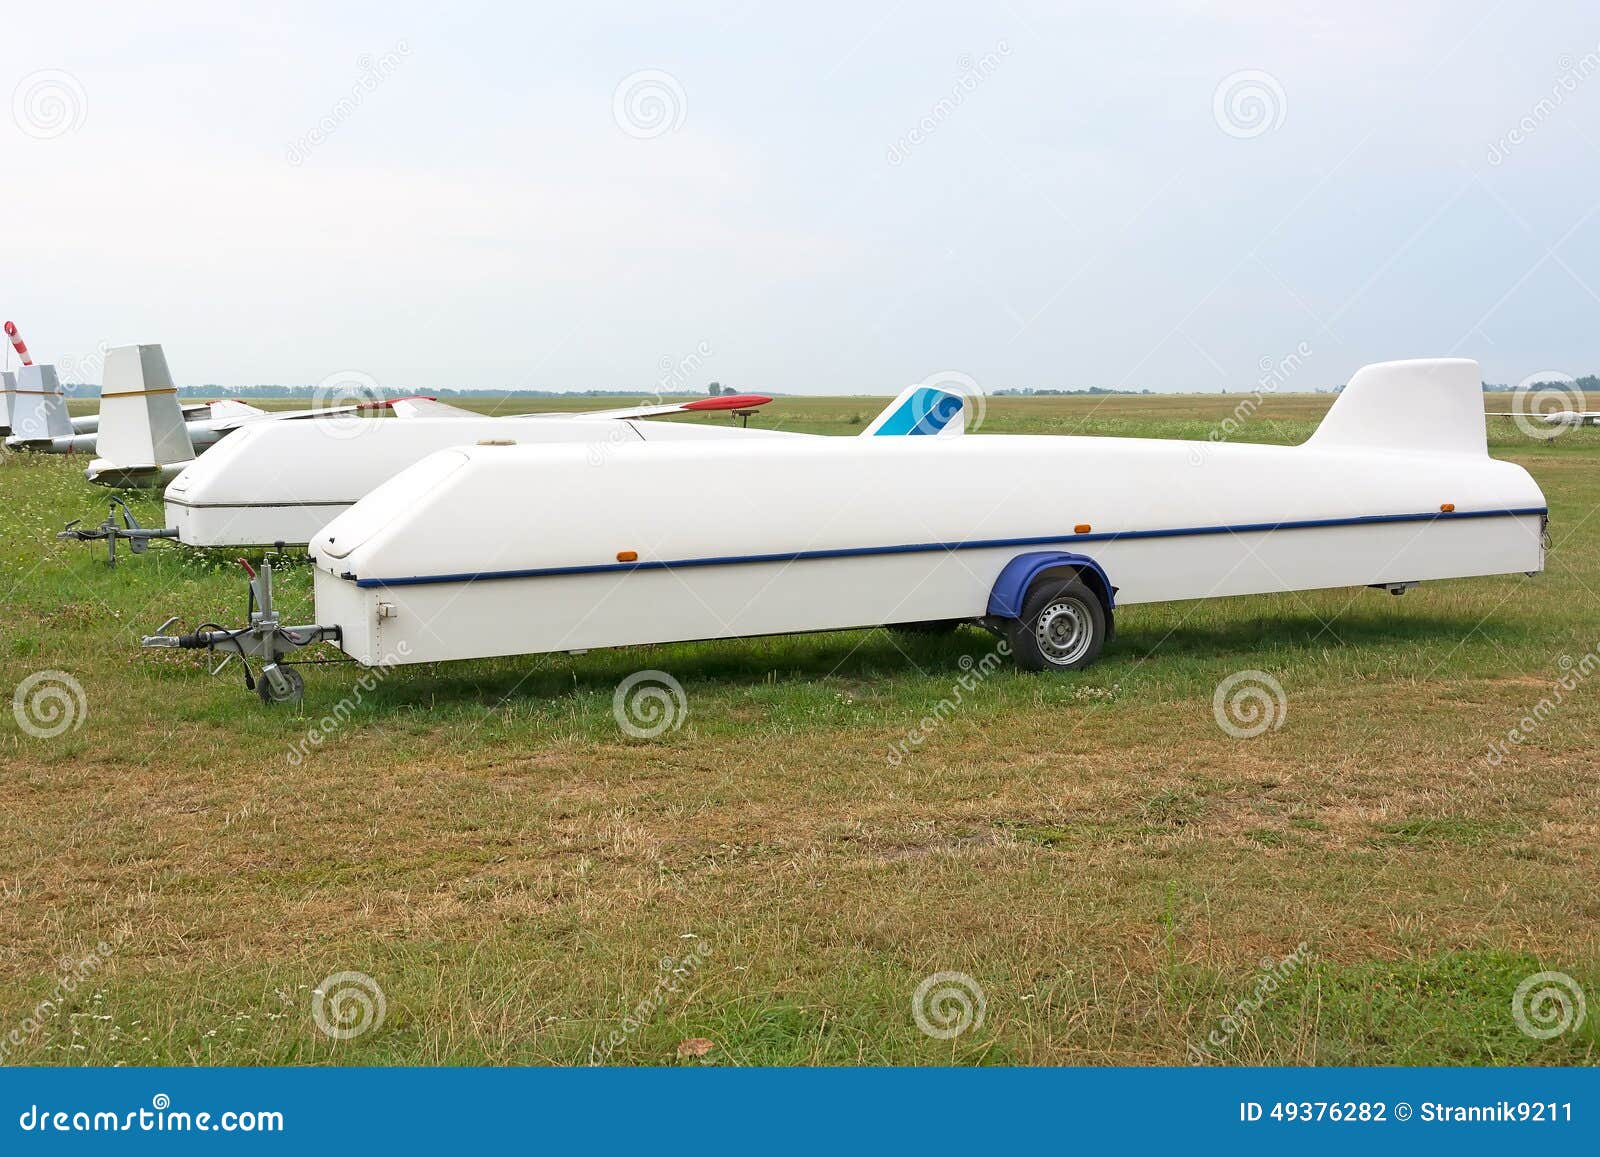 trailer-transportation-glider-standing-airfield-picture-taken-cloudy-day-overcast-49376282.jpg